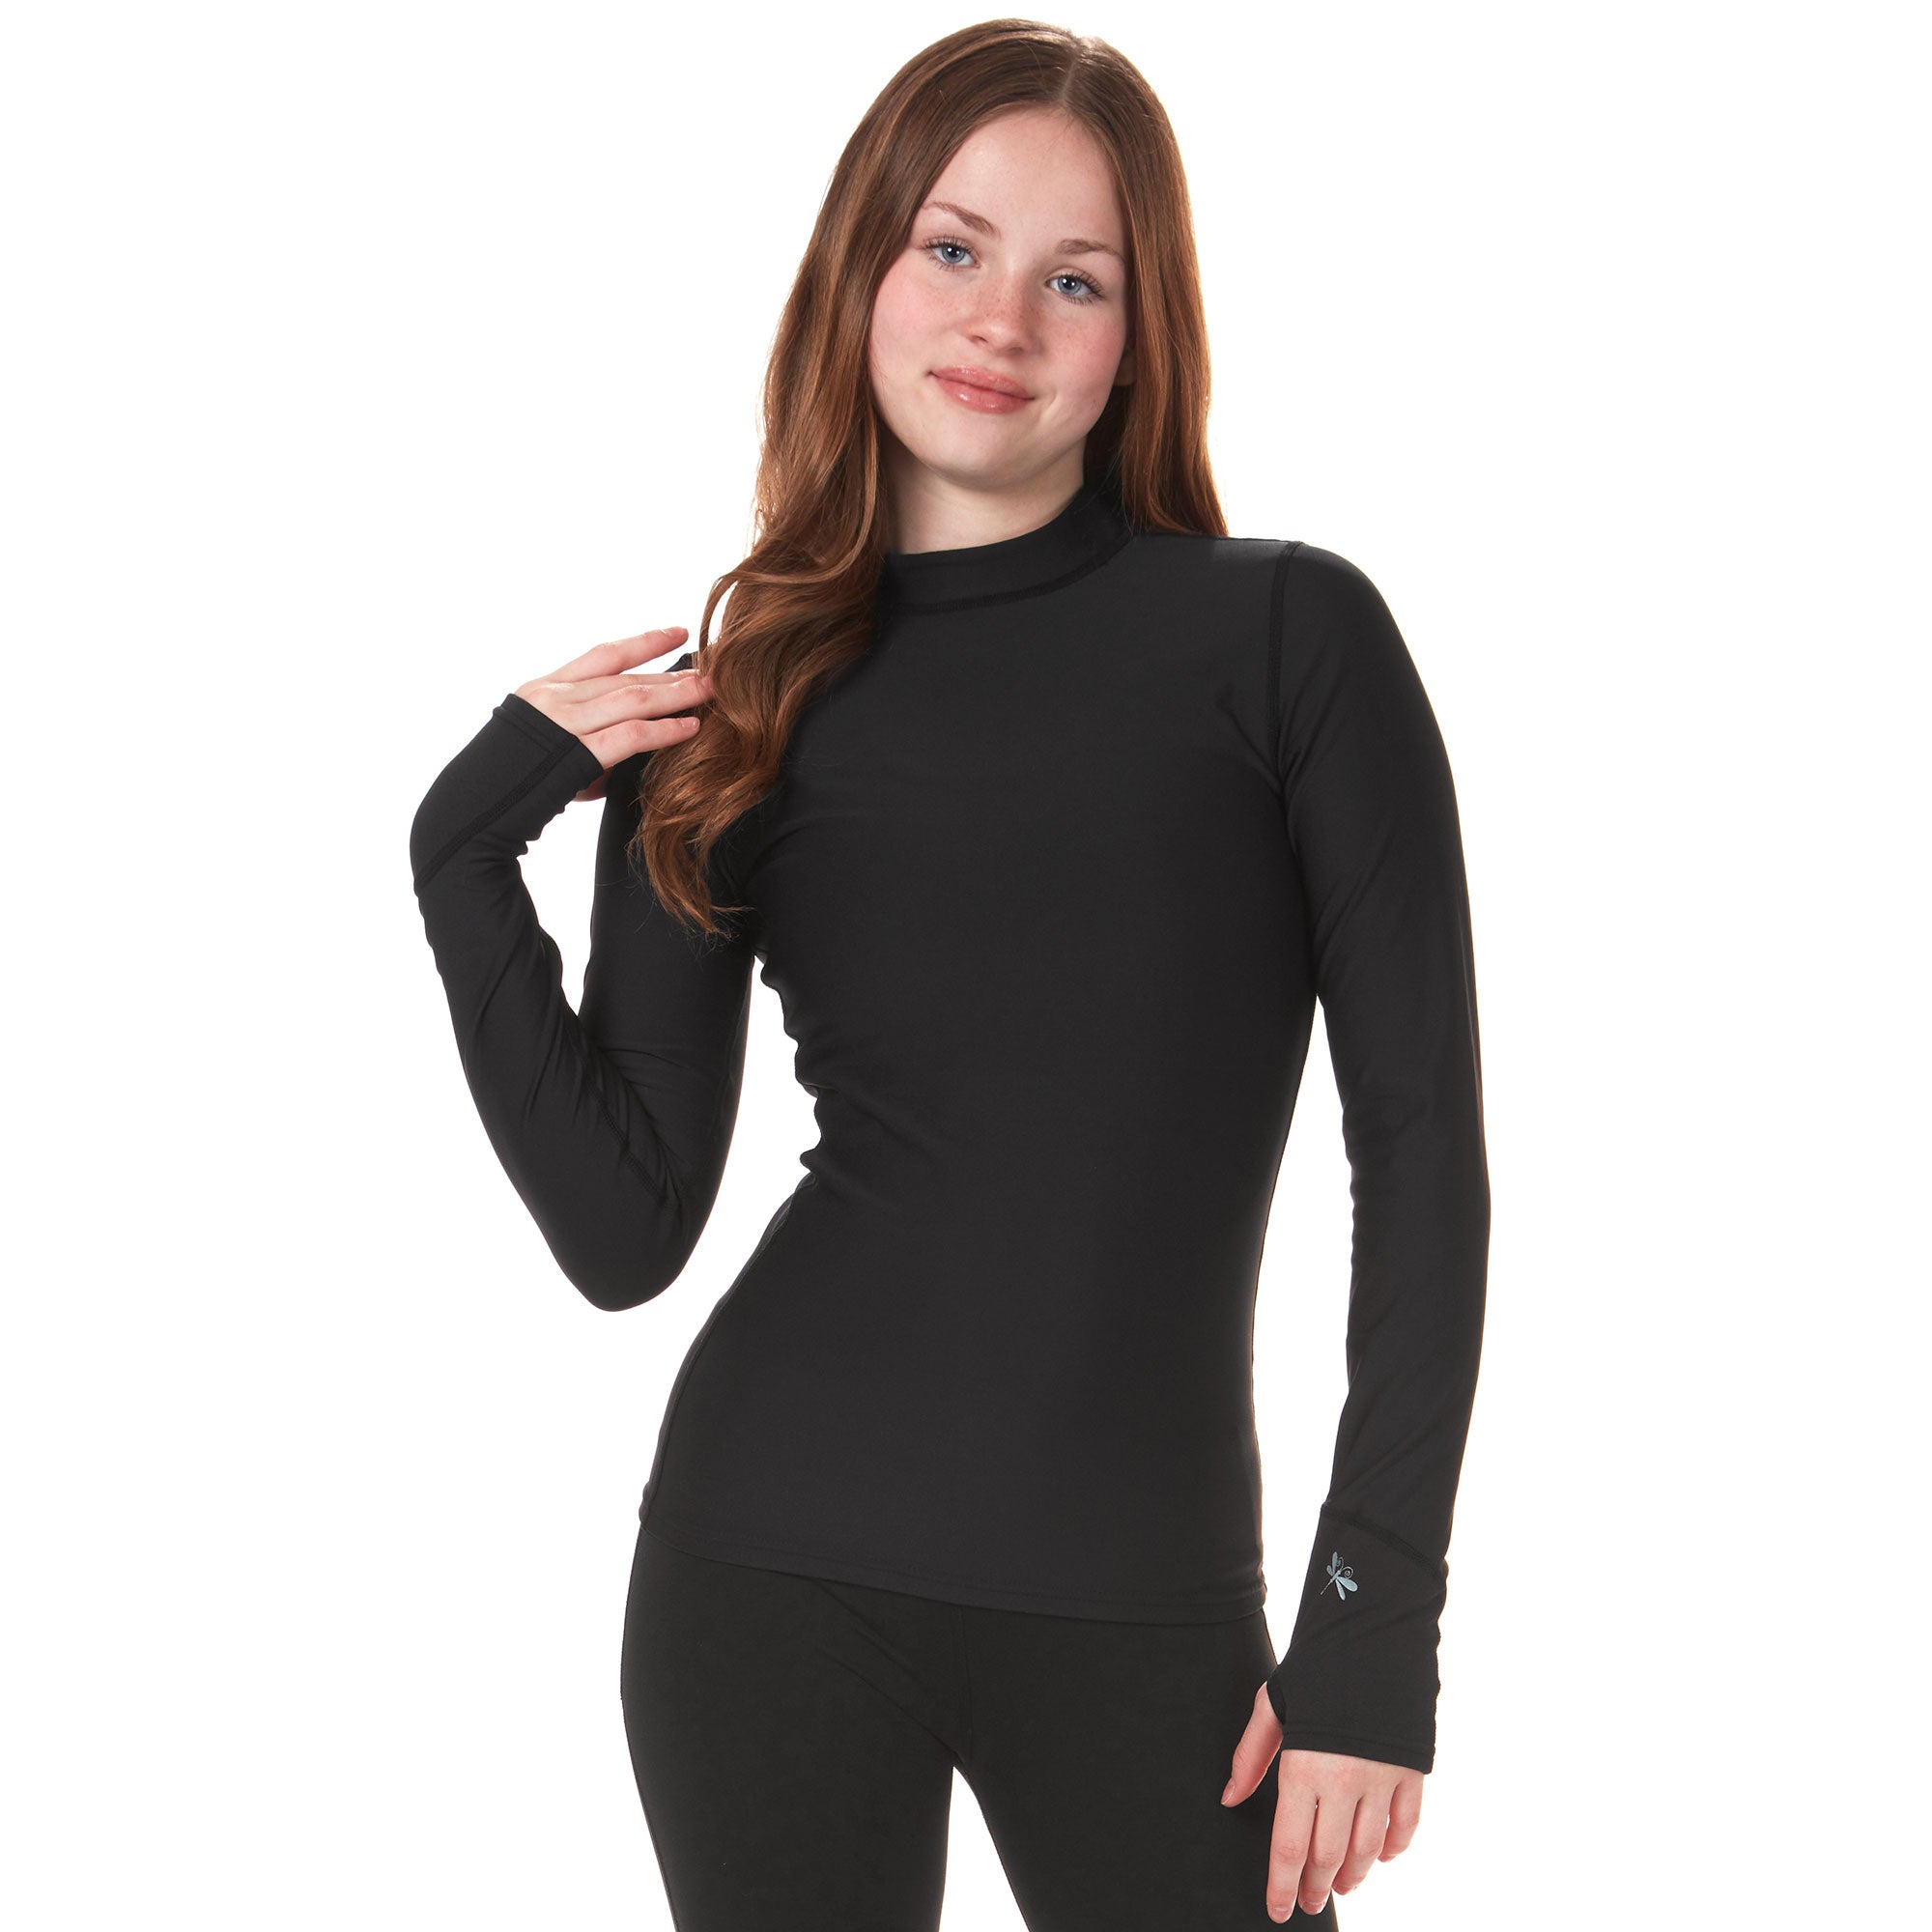 Long-Sleeve Compression Shirt for Girls